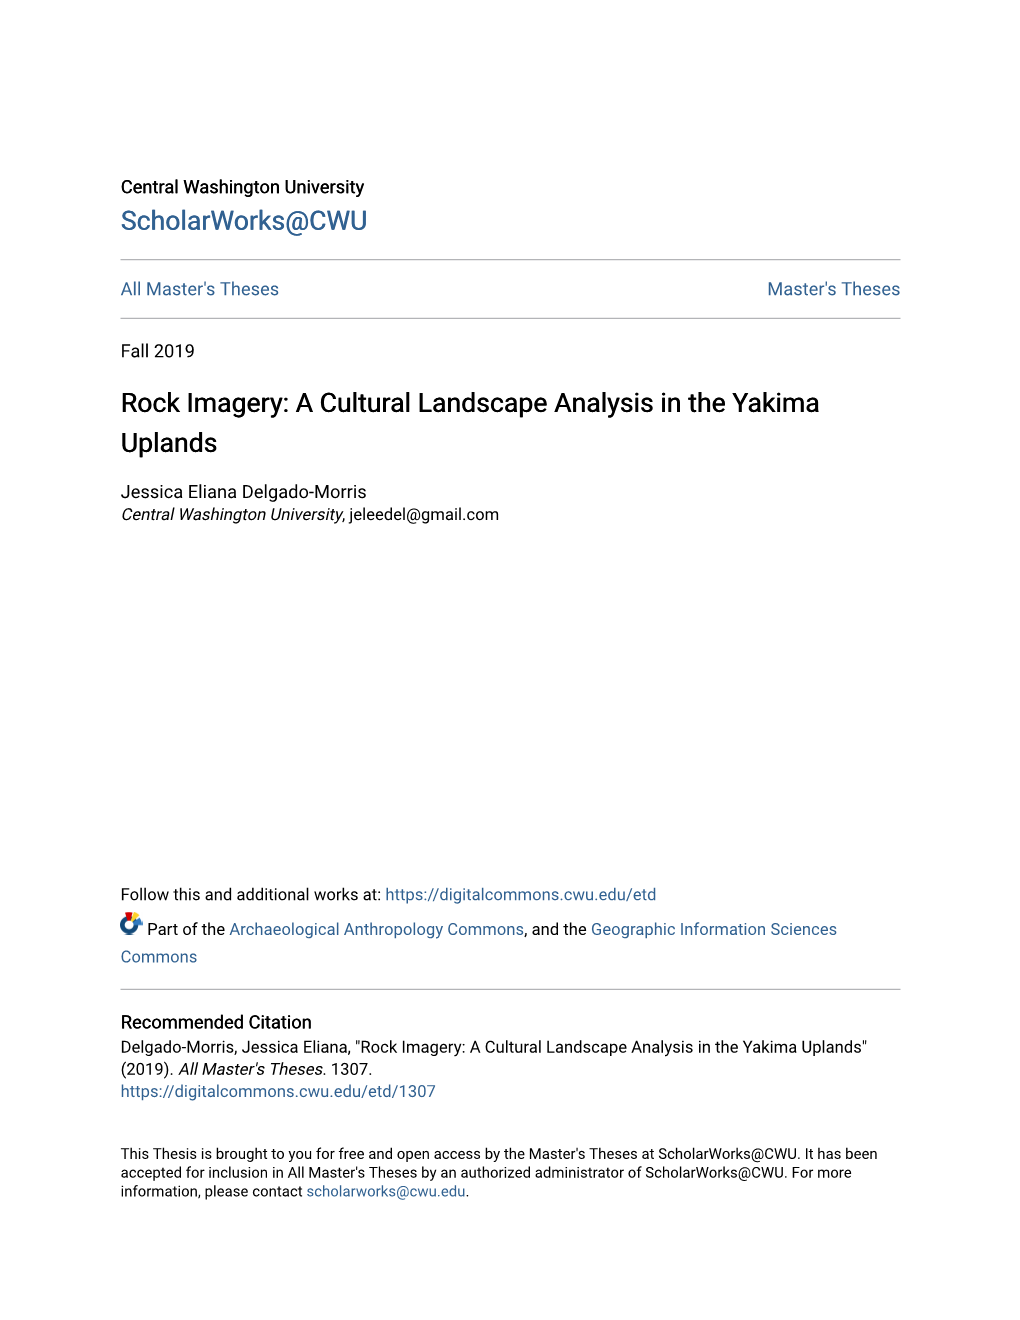 Rock Imagery: a Cultural Landscape Analysis in the Yakima Uplands